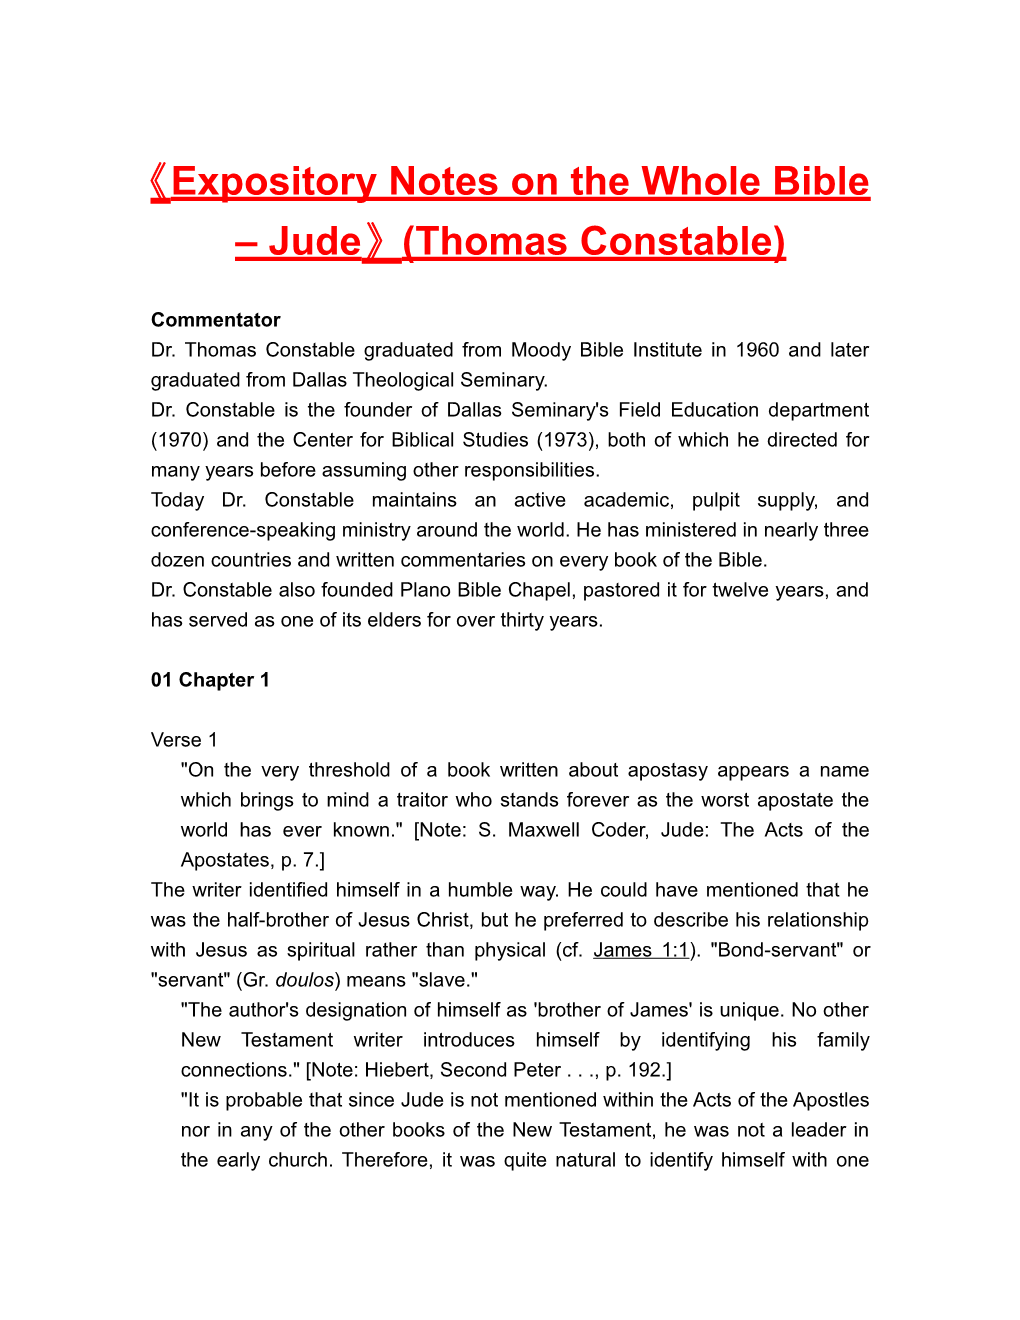 Expositorynotes on the Wholebible Jude (Thomas Constable)